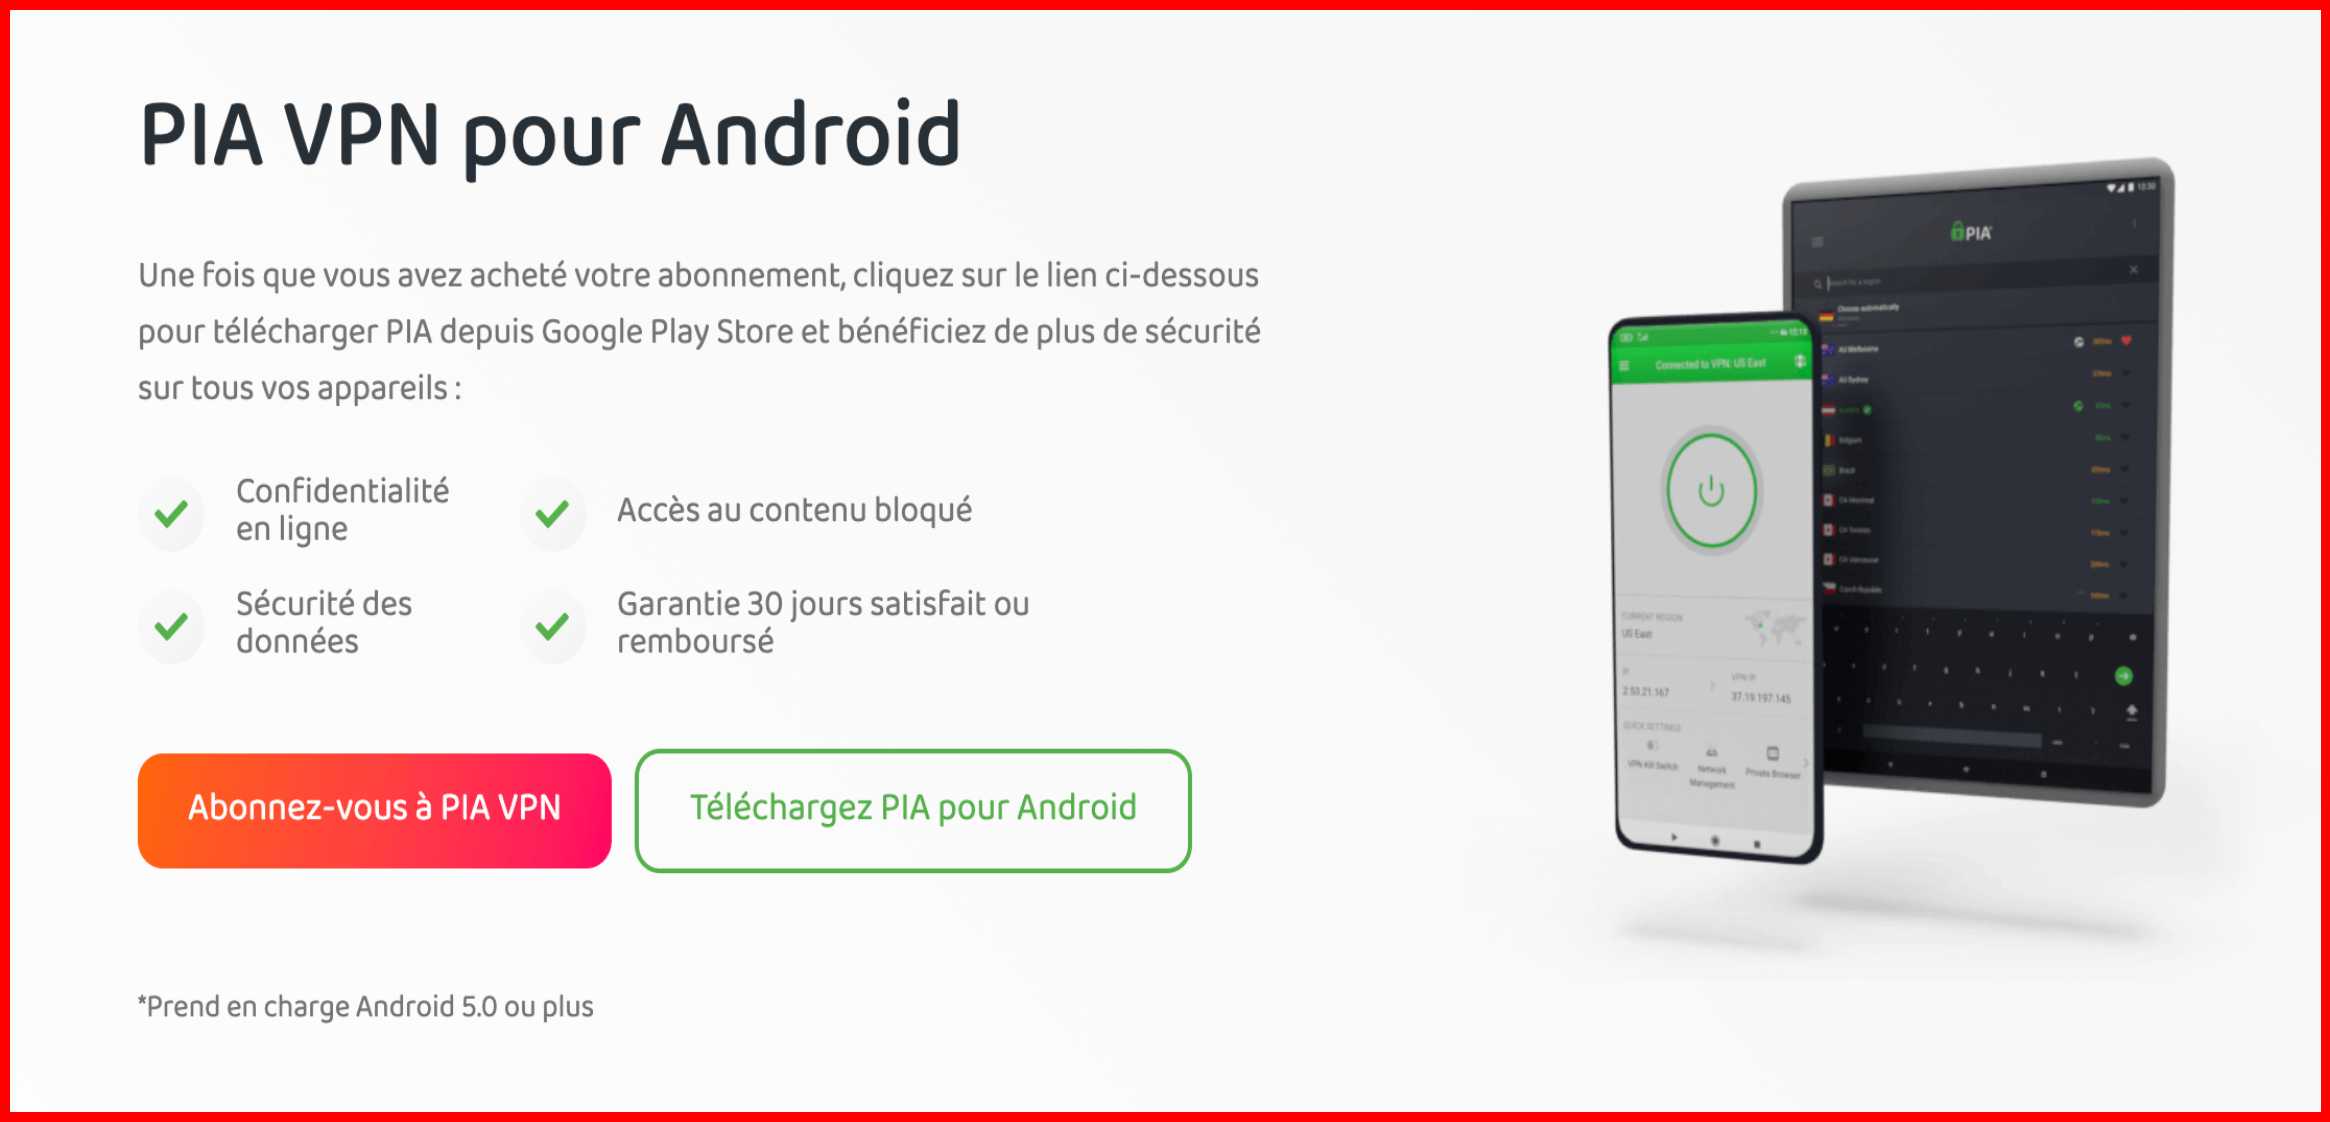 PIA VPN pour Android